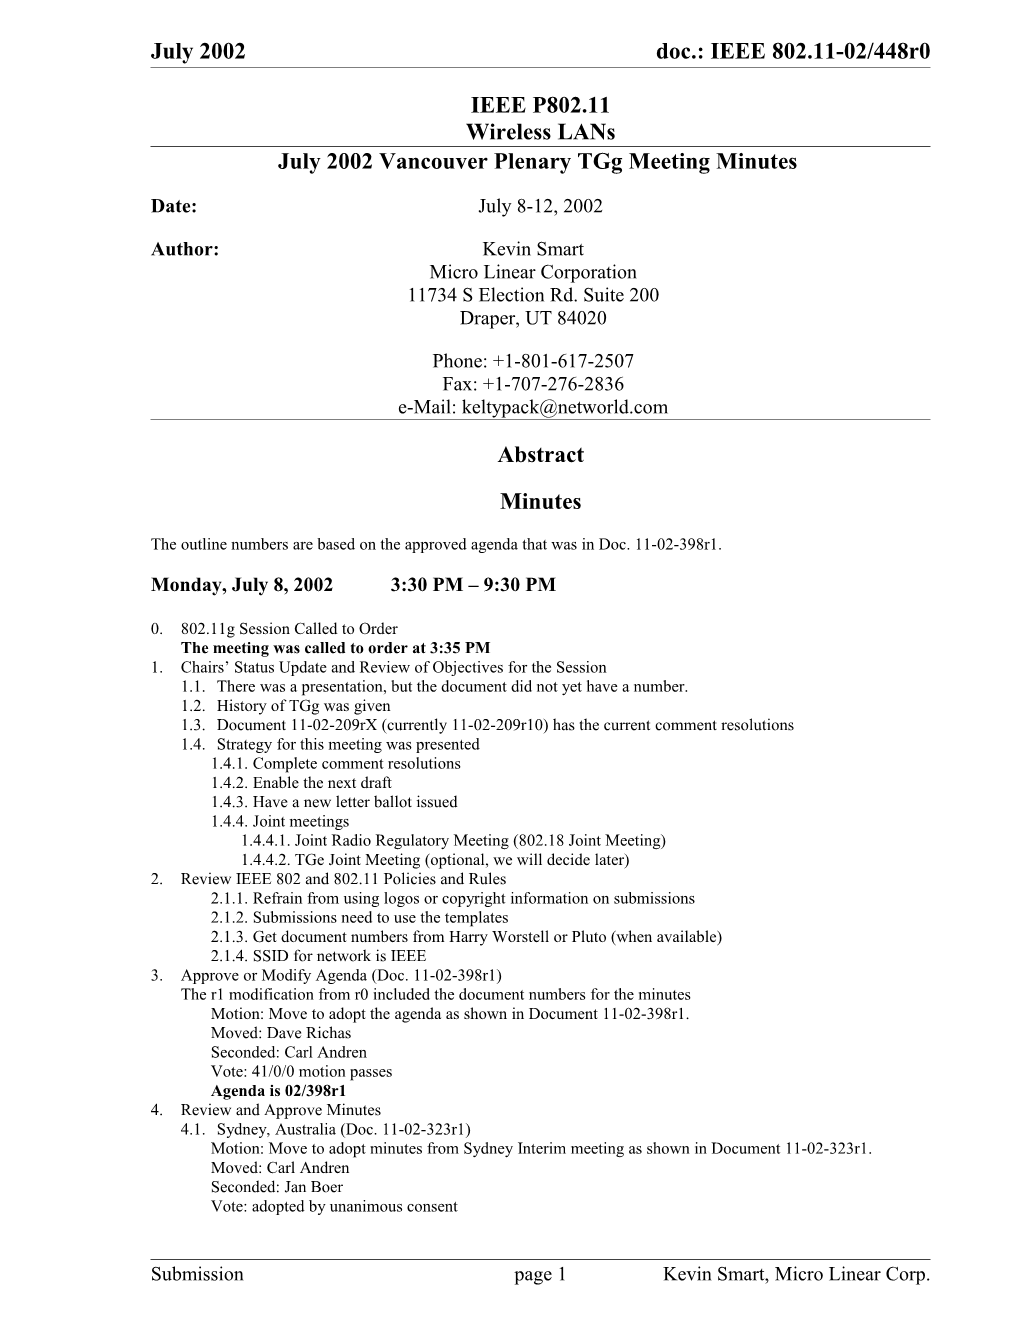 July 2002 Vancouver Plenary Tgg Meeting Minutes